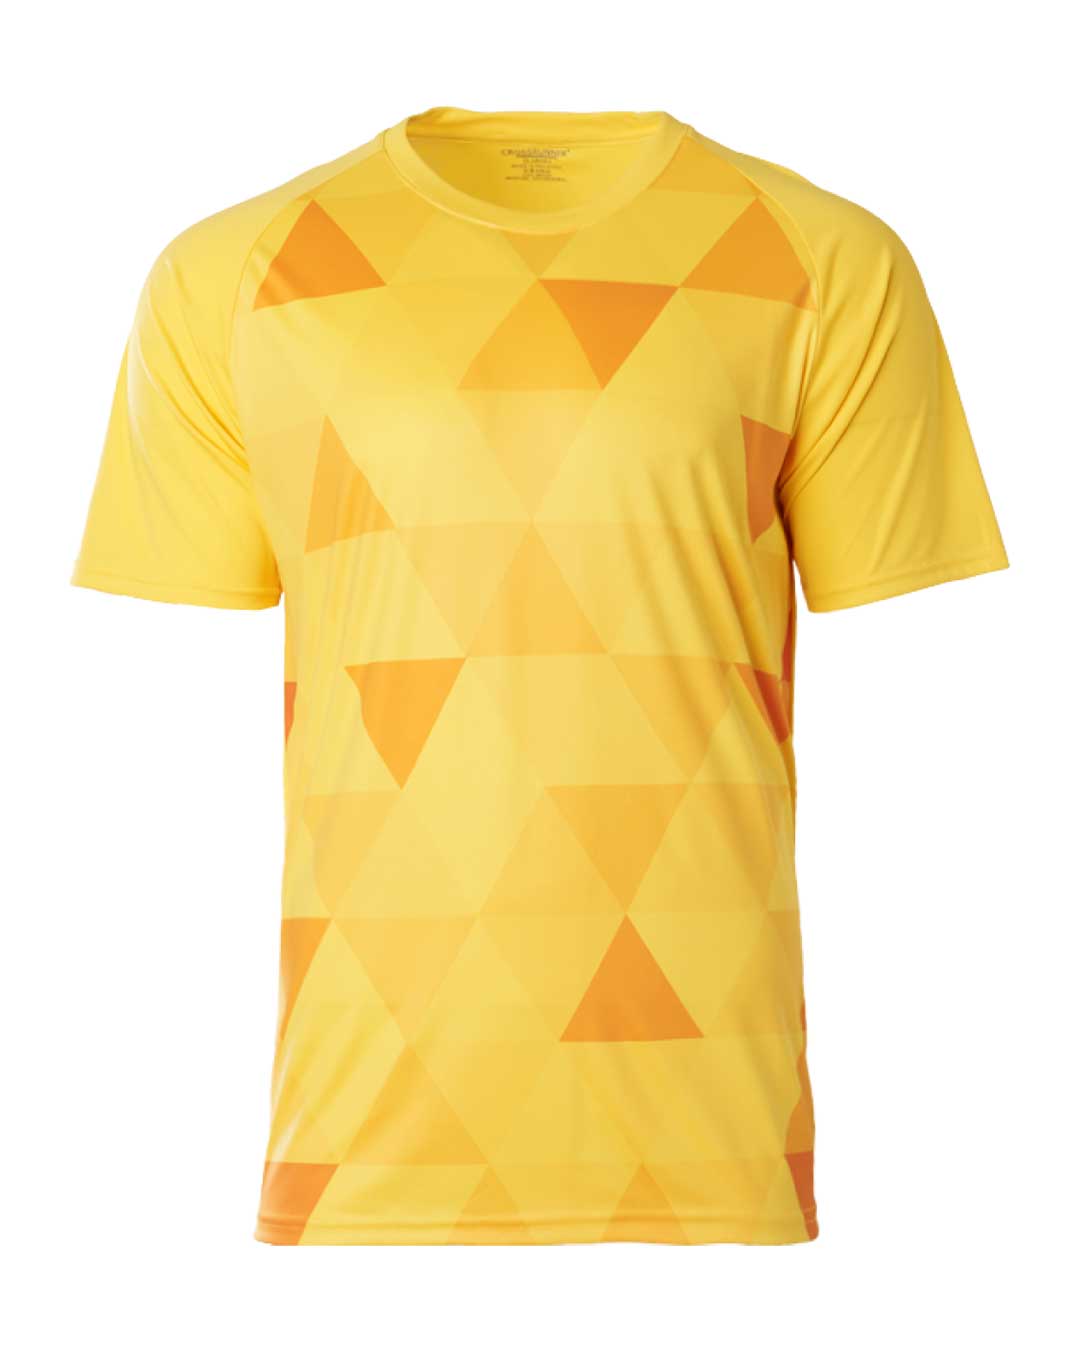 crossrunner® sublimated jersey crr 1900 trimosaic tee